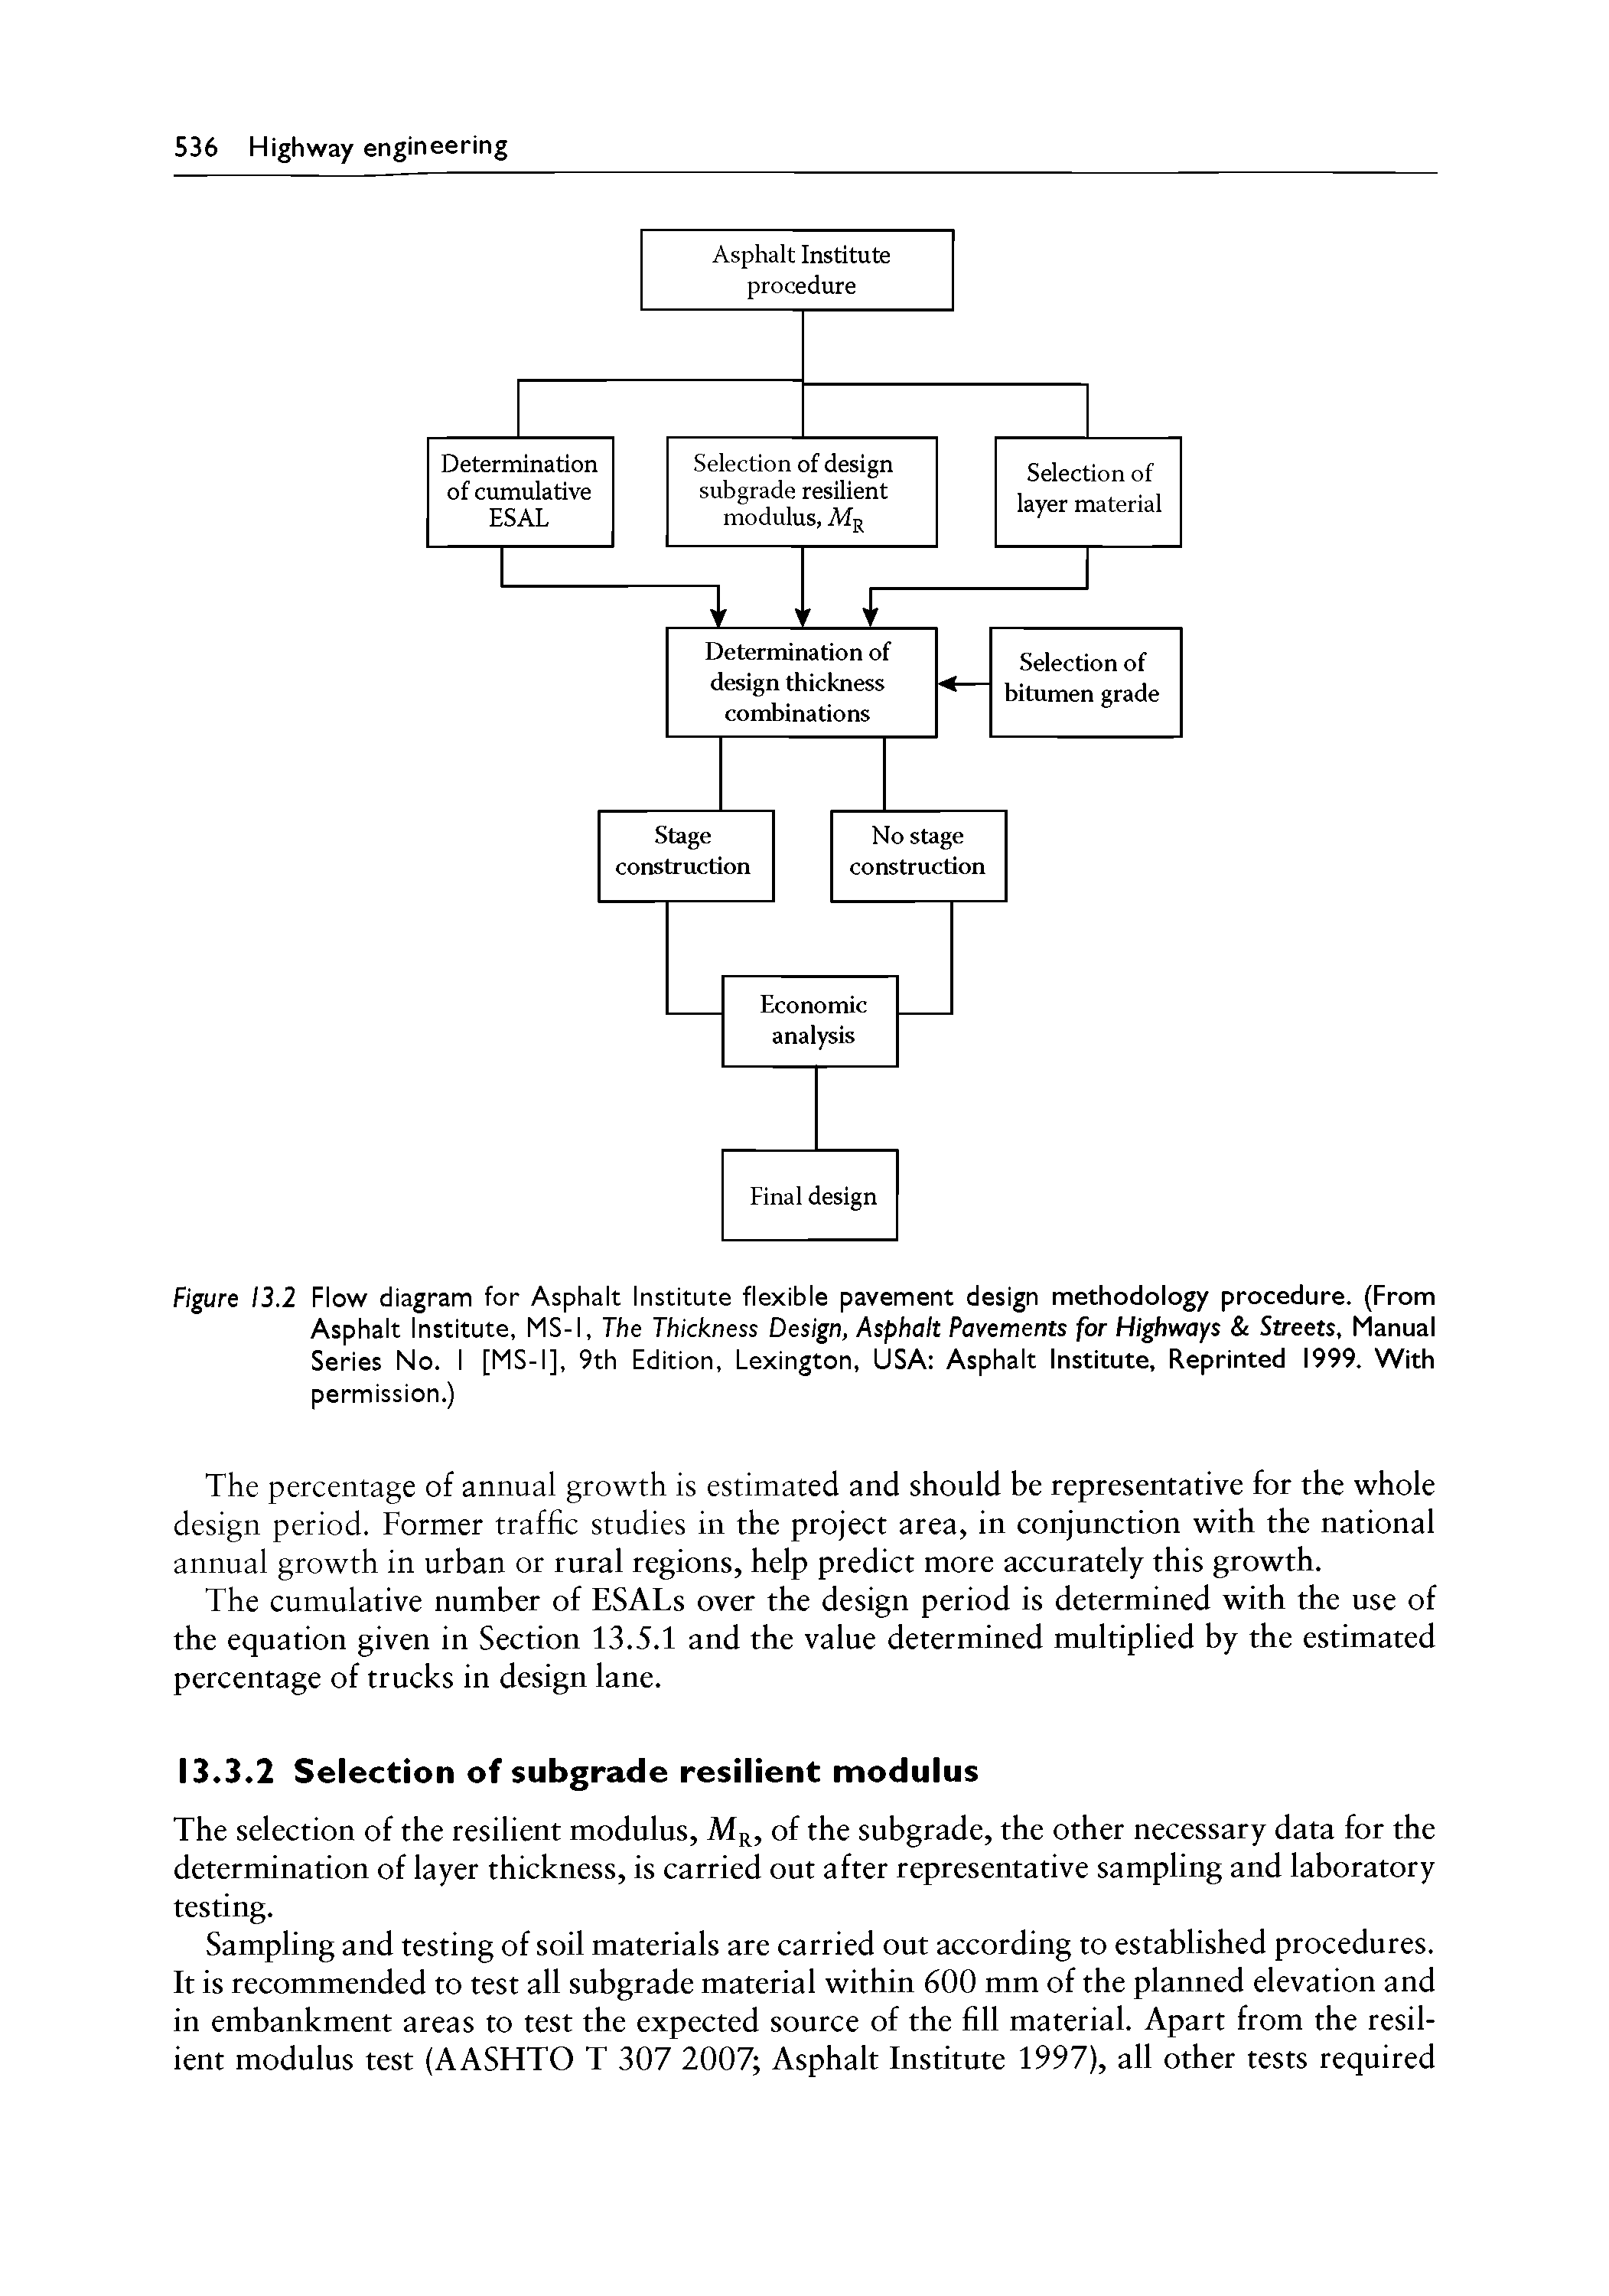 Figure 13.2 Flow diagram for Asphalt Institute flexible pavement design methodology procedure. (From Asphalt Institute, MS-1, The Thickness Design, Asphalt Pavements for Highways Streets, Manual Series No. I [MS-1], 9th Edition, Lexington, USA Asphalt Institute, Reprinted 1999. With permission.)...